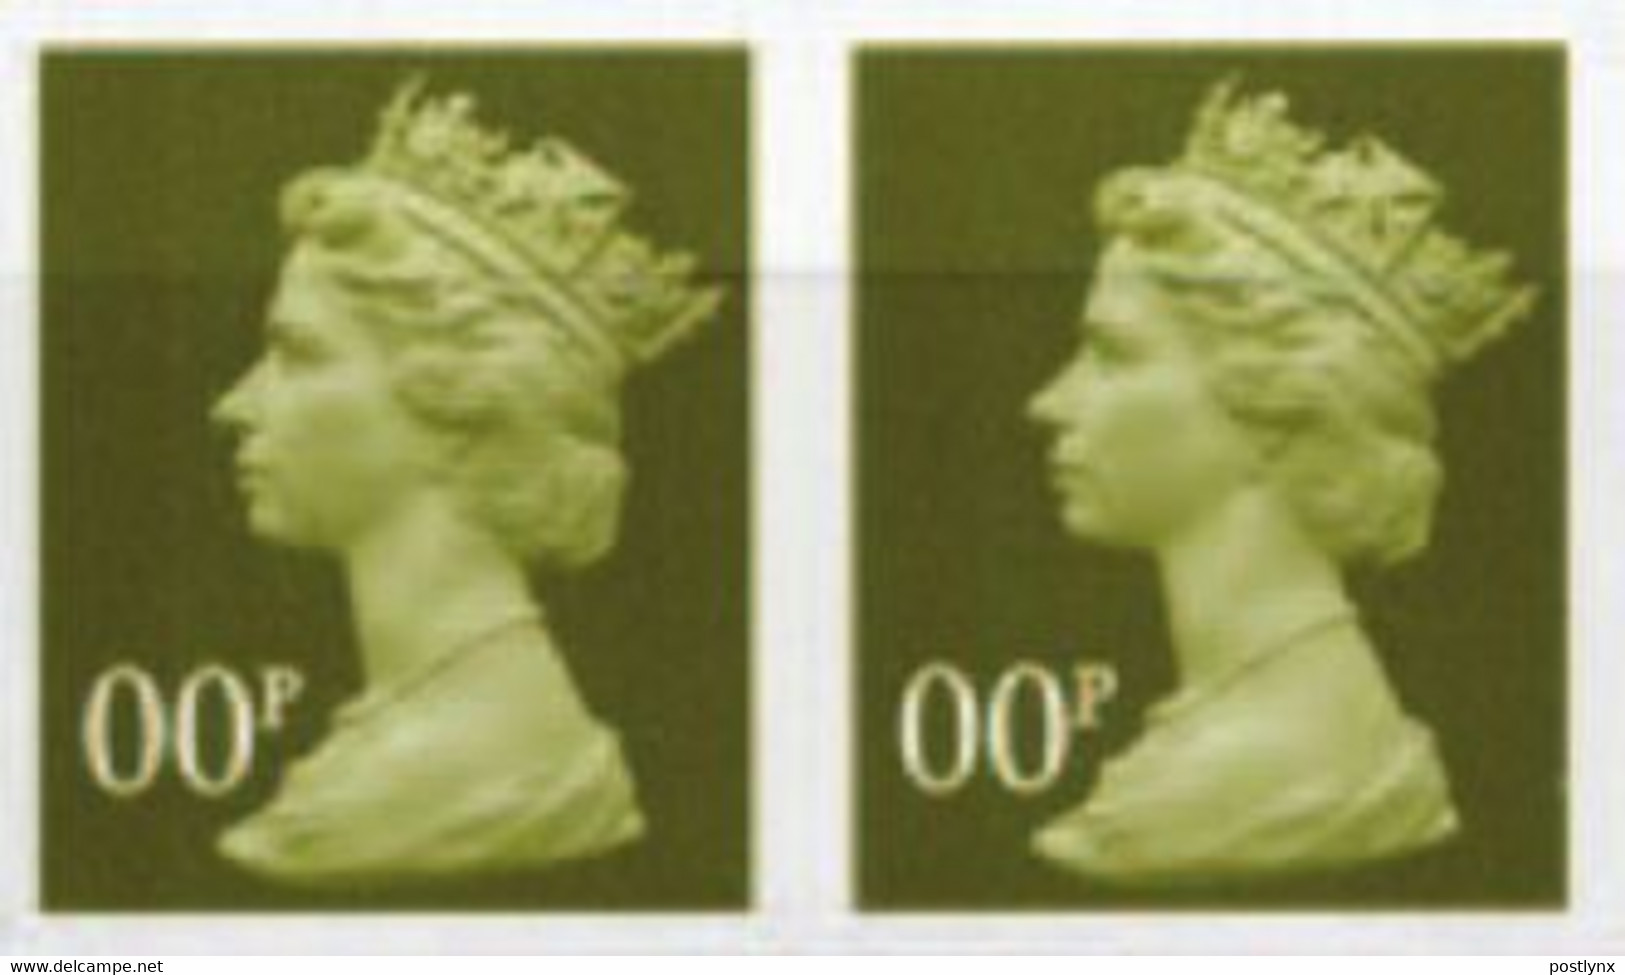 GREAT BRITAIN 2002 QII Machine 00 (6p) Yellow-Olive TRIAL IMPERF.PAIR - Essays, Proofs & Reprints